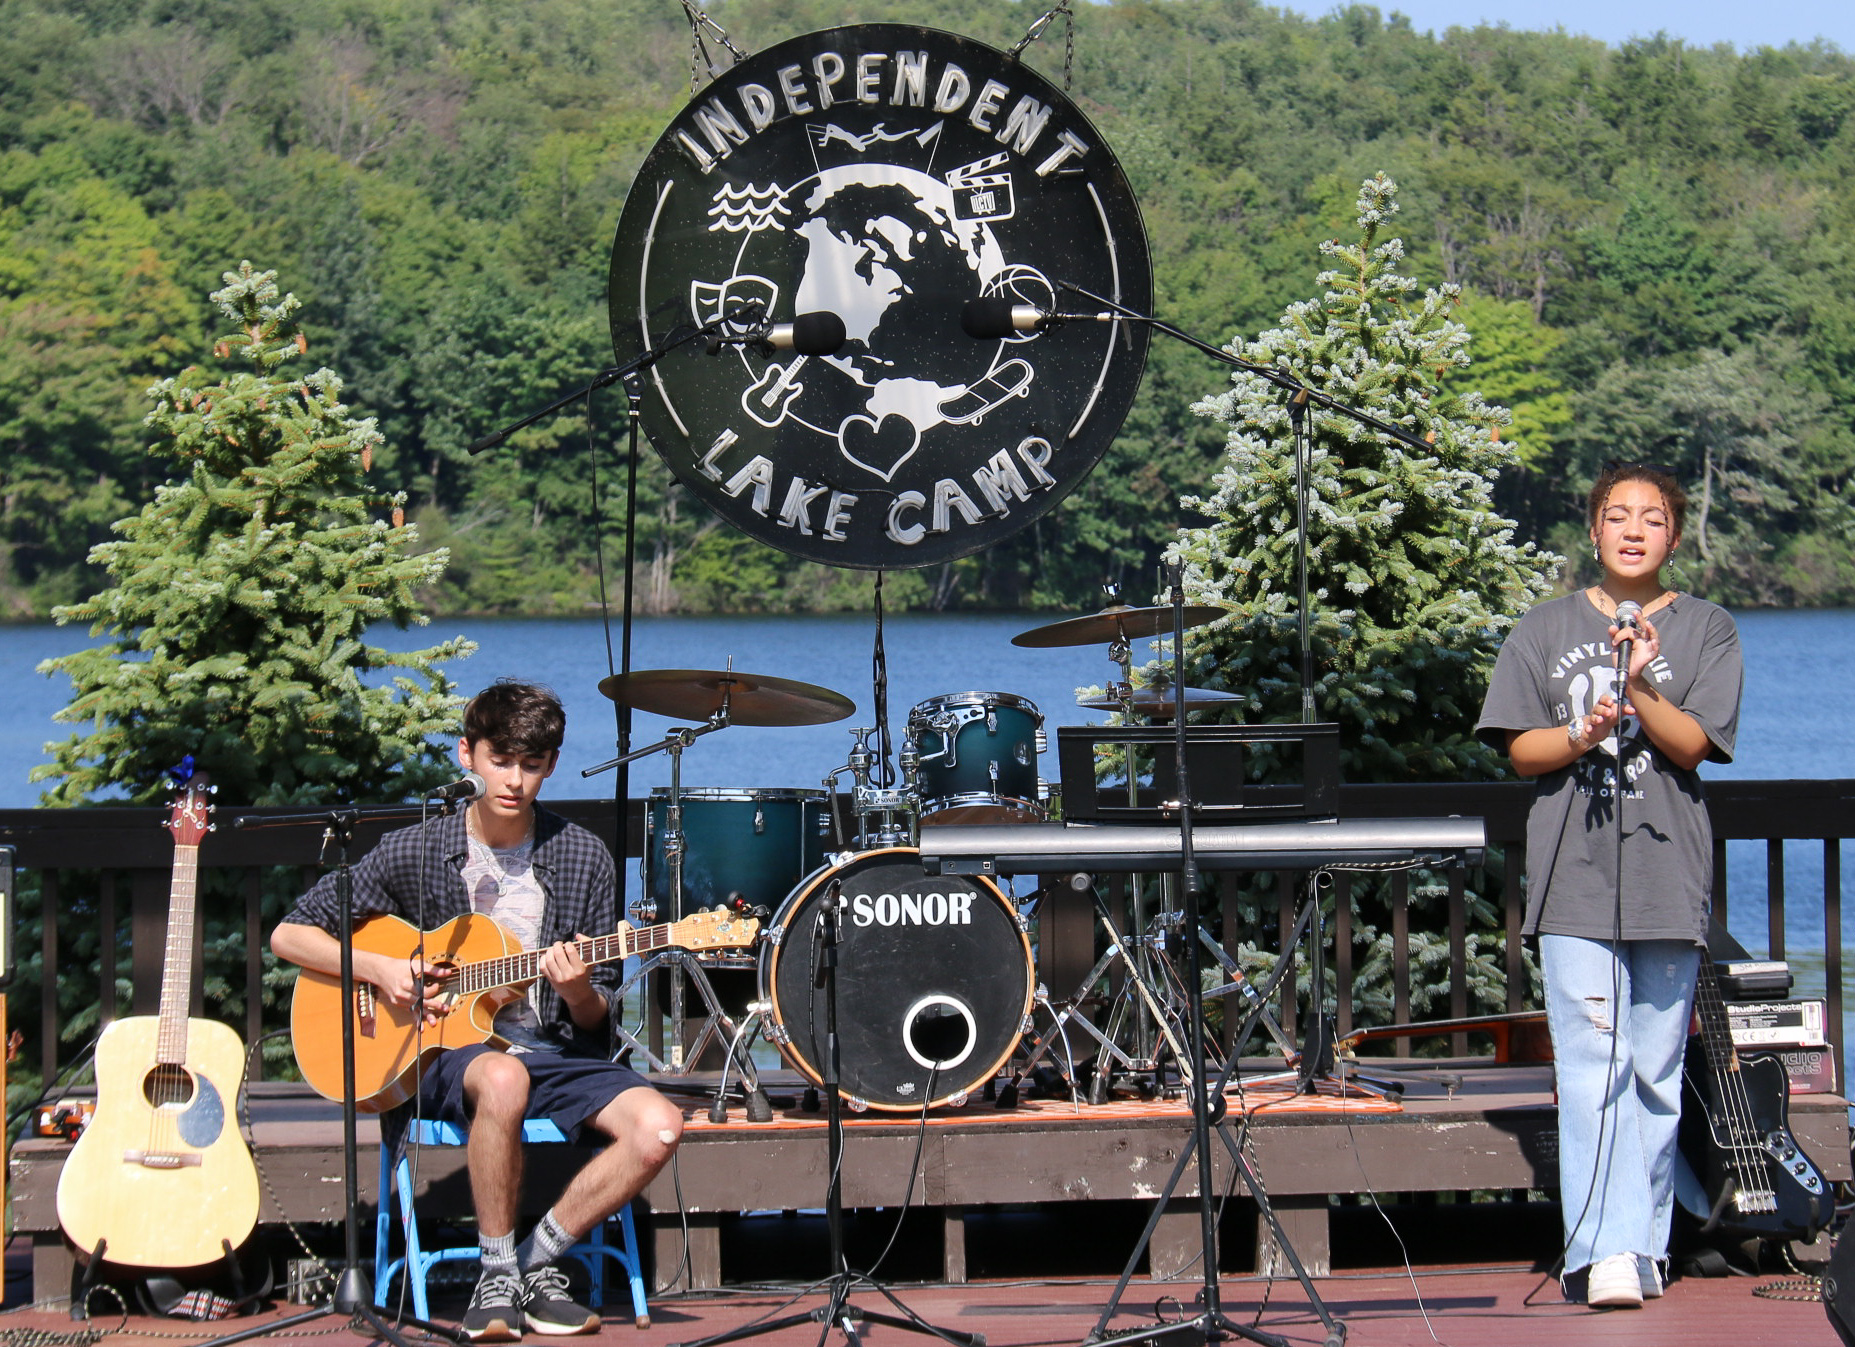 Campers playing live music on stage